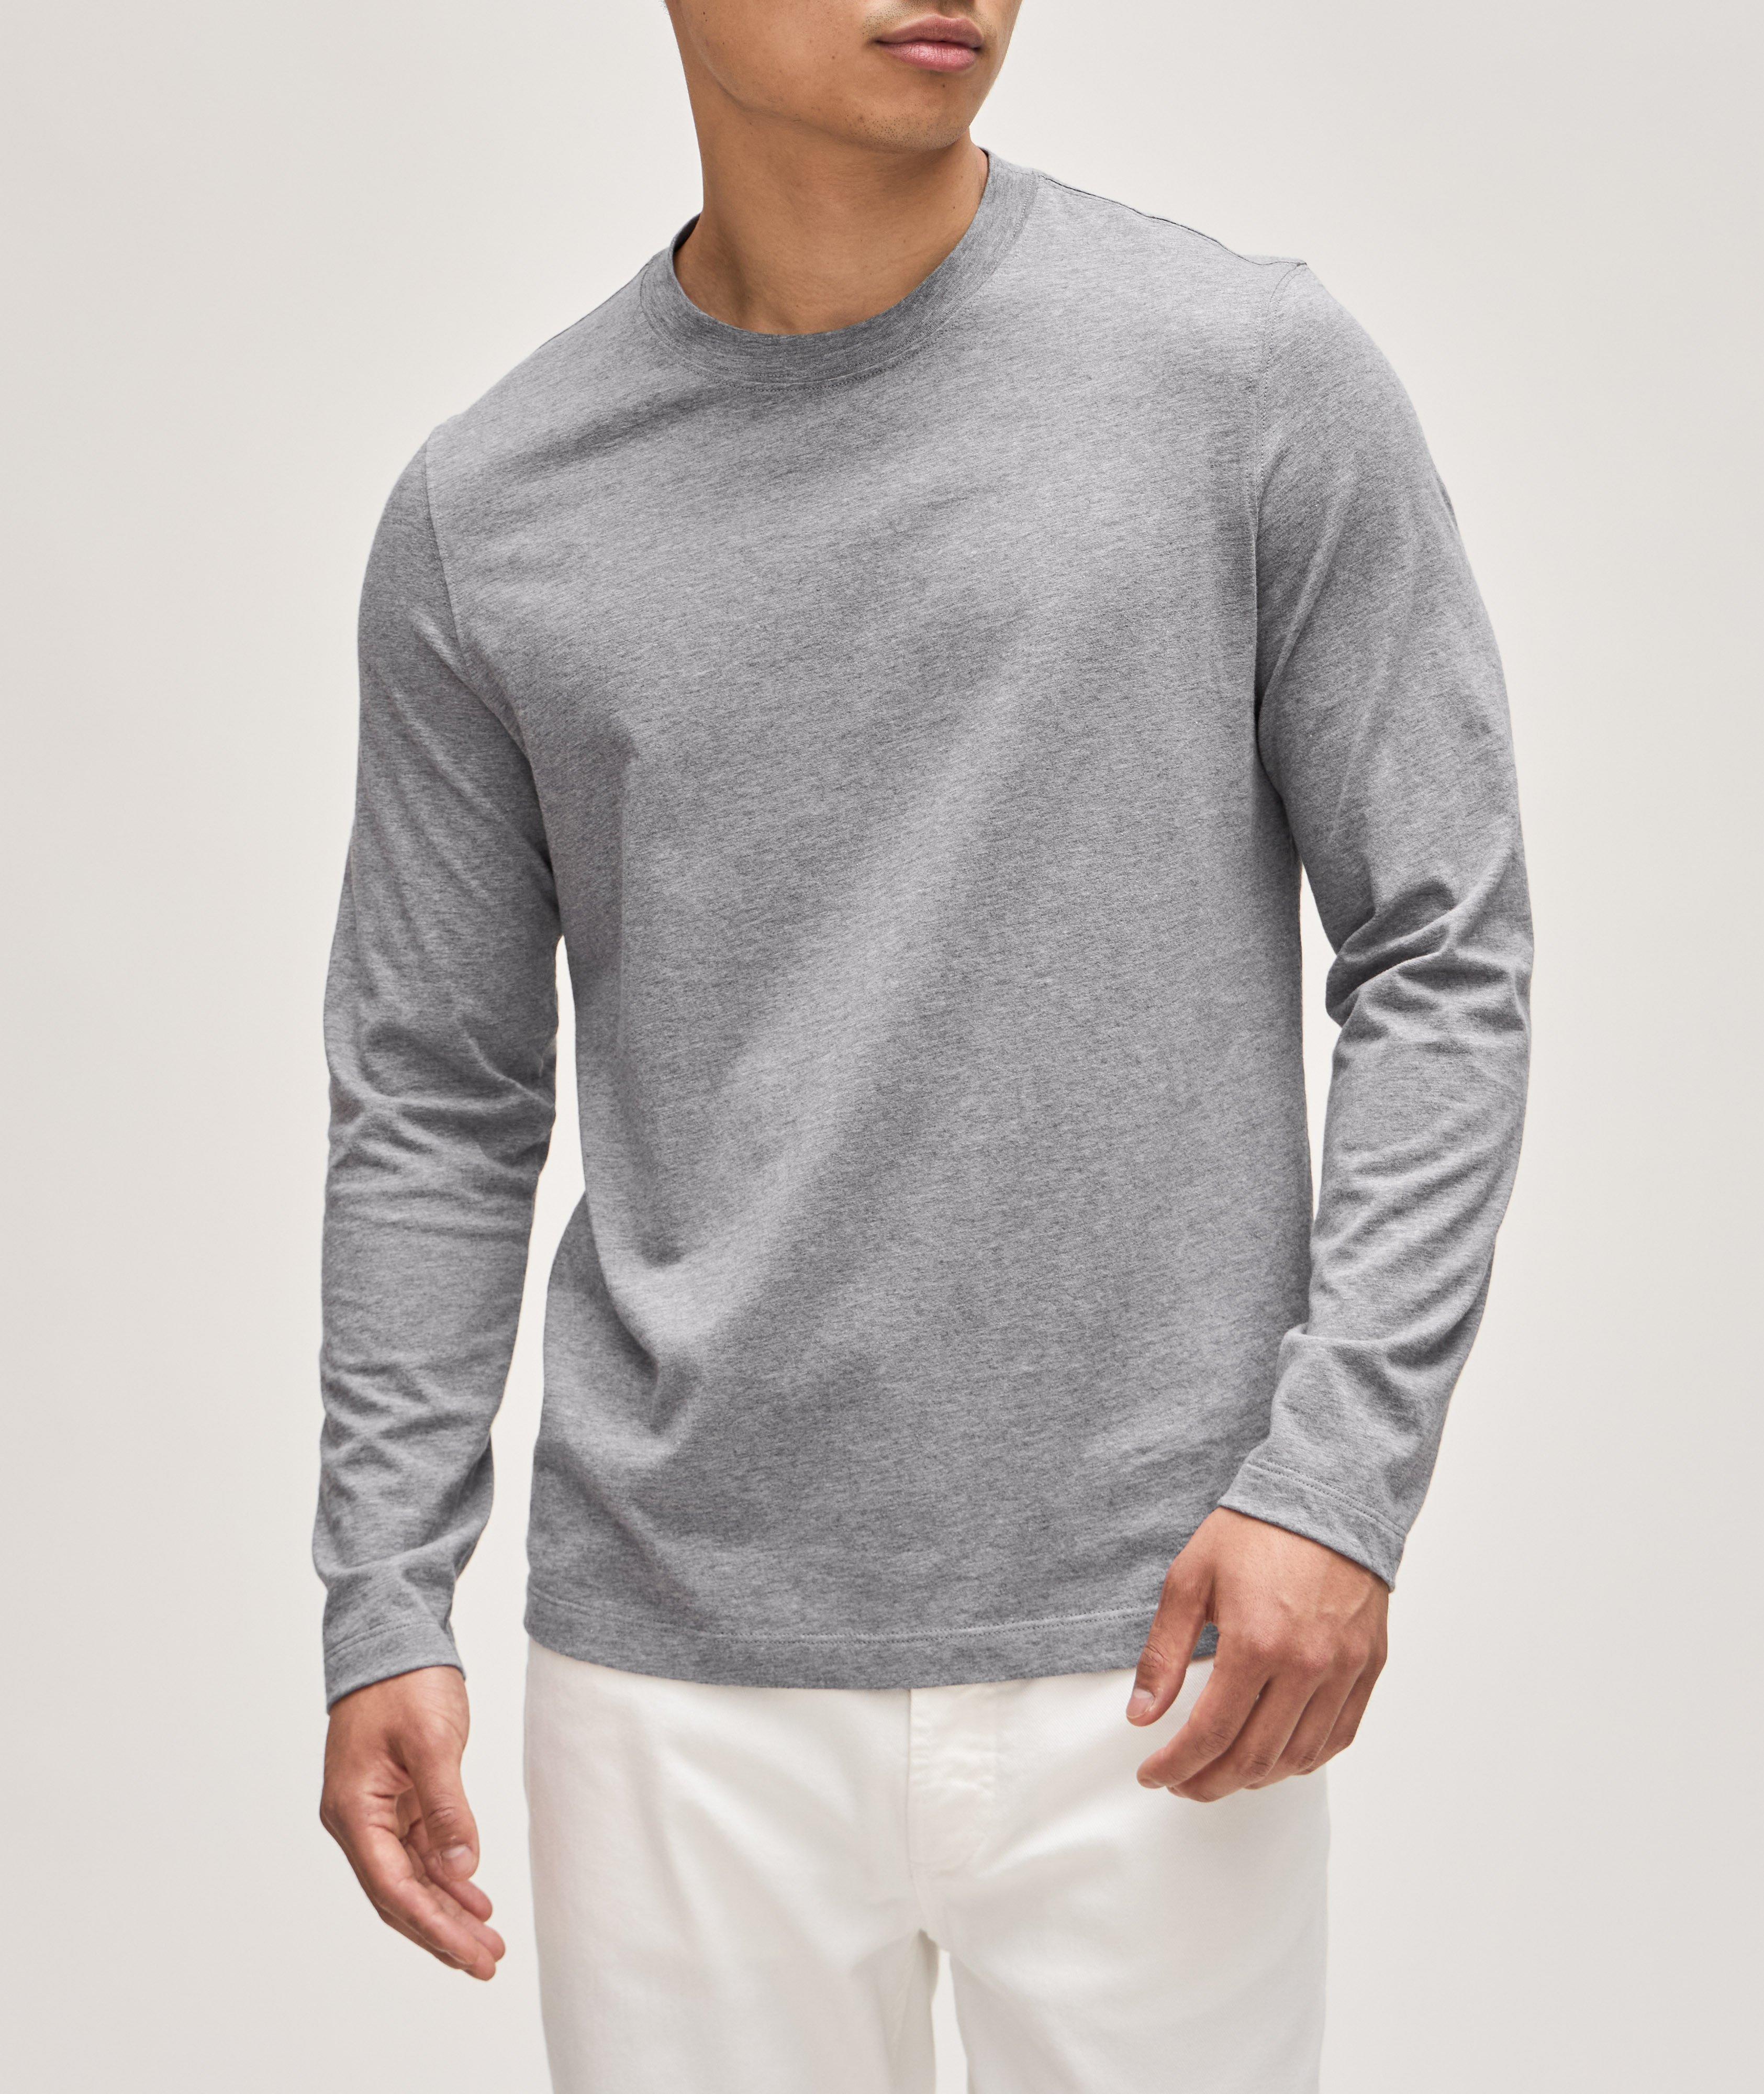 Essential Long-Sleeve Jersey Cotton T-Shirt  image 1